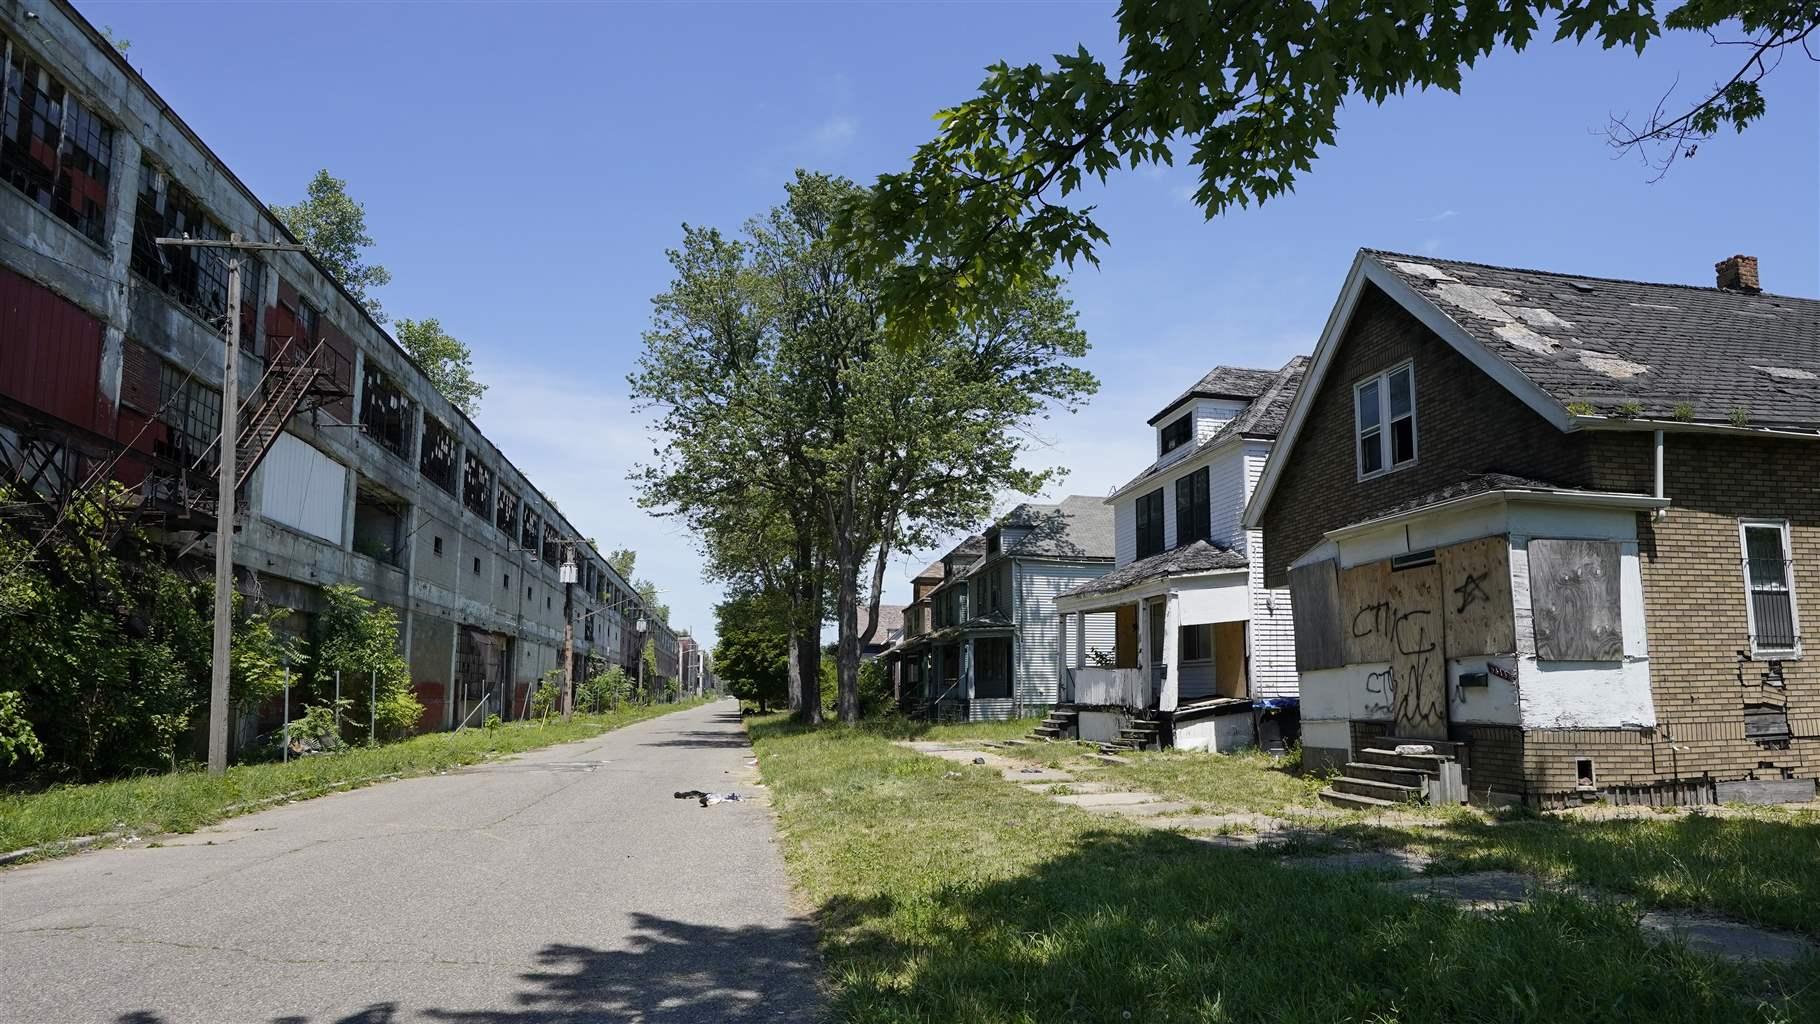 Exterior of the Packard Plant, left, next to boarded up houses on Detroit&#39;s east side, Thursday, June 30, 2022. The factory built in the early 1900s turned out high-end cars into the 1950s. It was considered one of the city&#39;s automotive jewels, but now is among the nation&#39;s most notorious examples of urban blight. Parts of the 3.5 million-square-foot, 40-acre Packard plant complex will be demolished by the year&#39;s end. (AP Photo/Carlos Osorio)